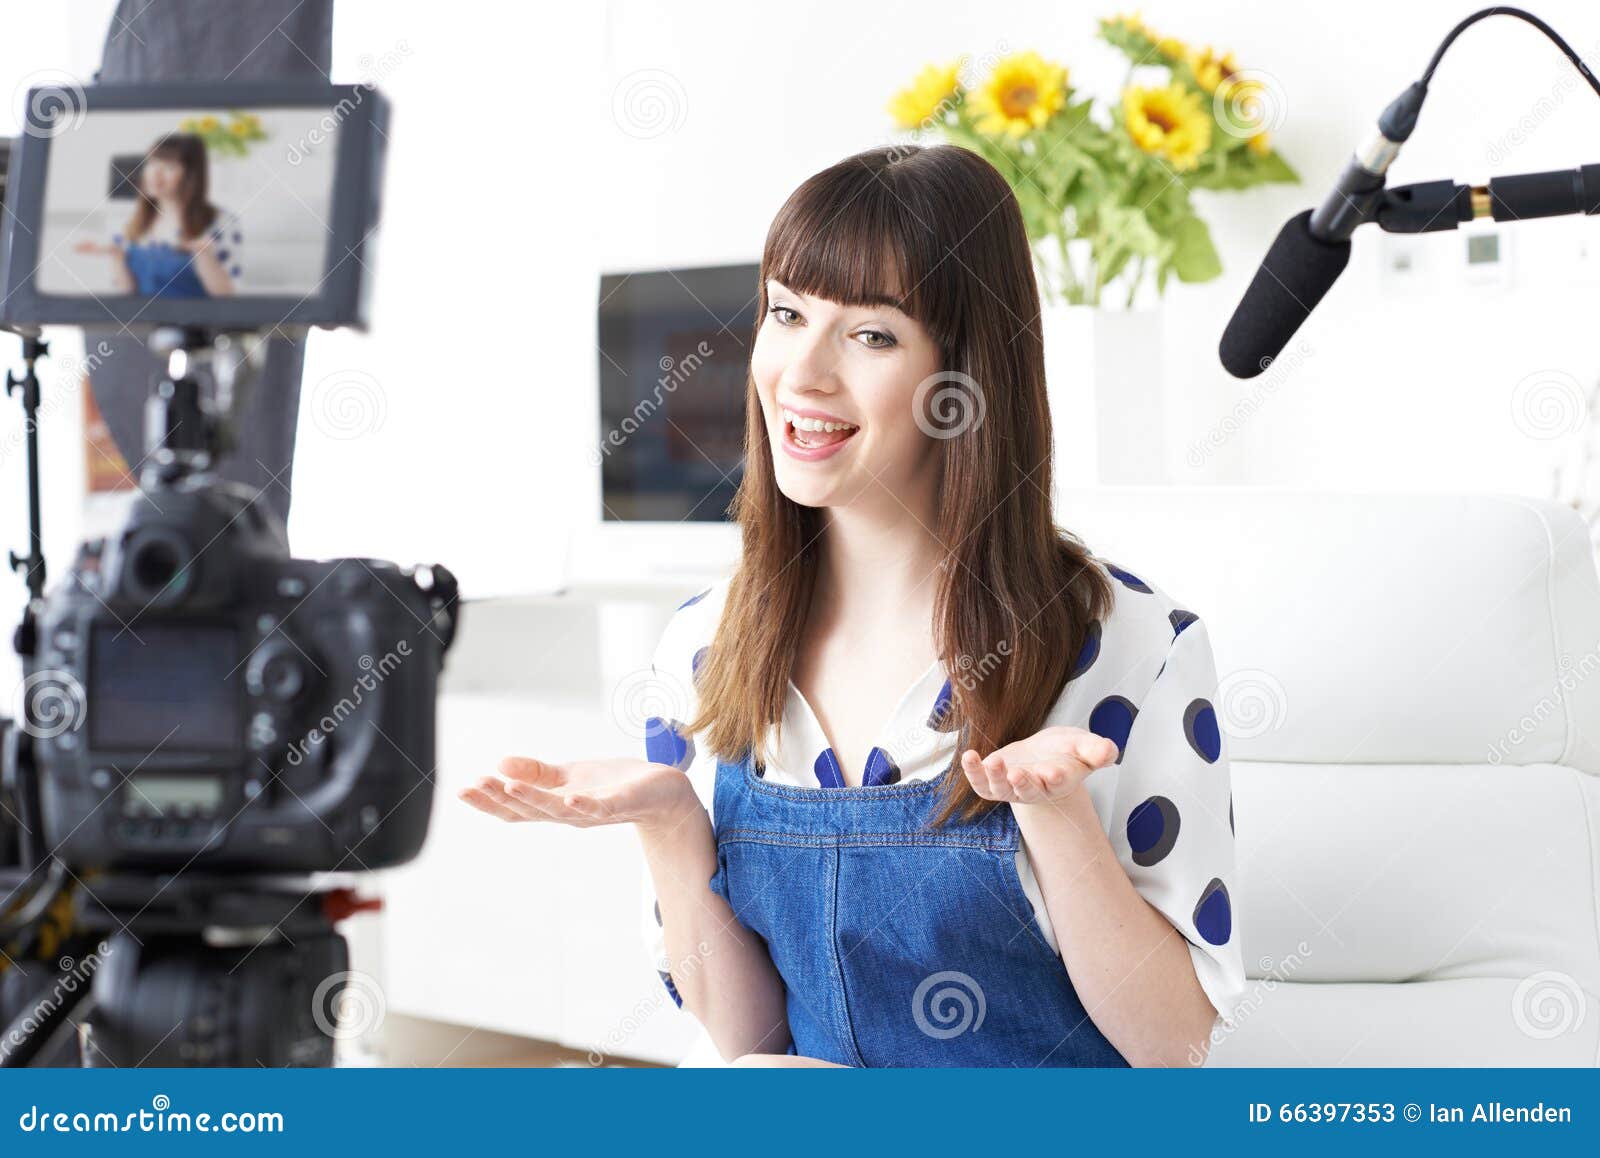 female vlogger recording broadcast at home